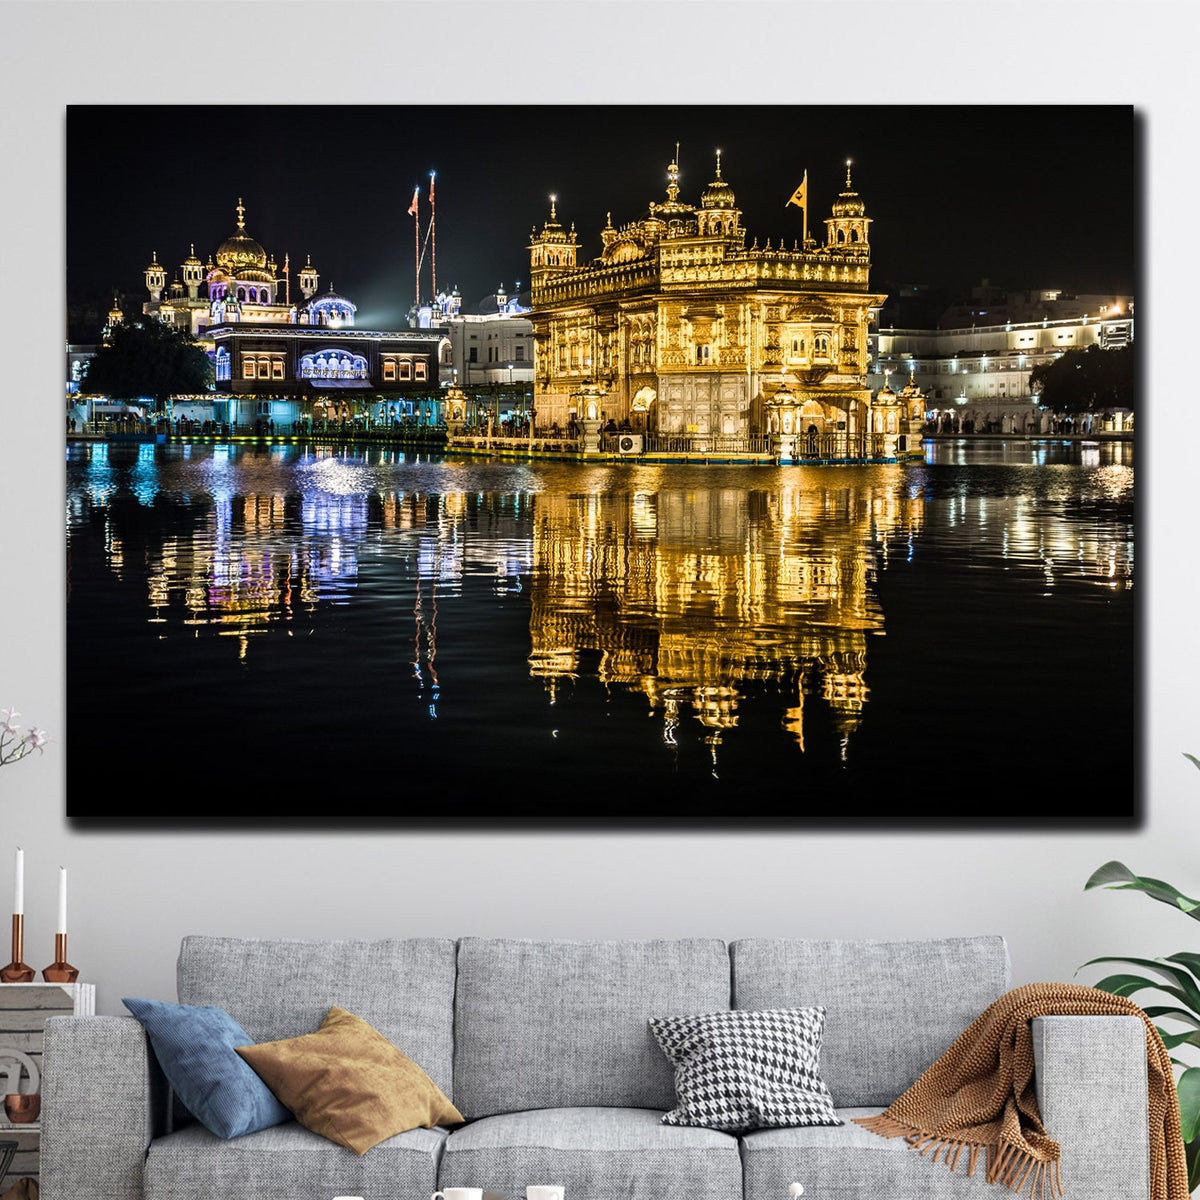 https://cdn.shopify.com/s/files/1/0387/9986/8044/products/TheMajesticGoldenTempleCanvasArtprintStretched-1.jpg